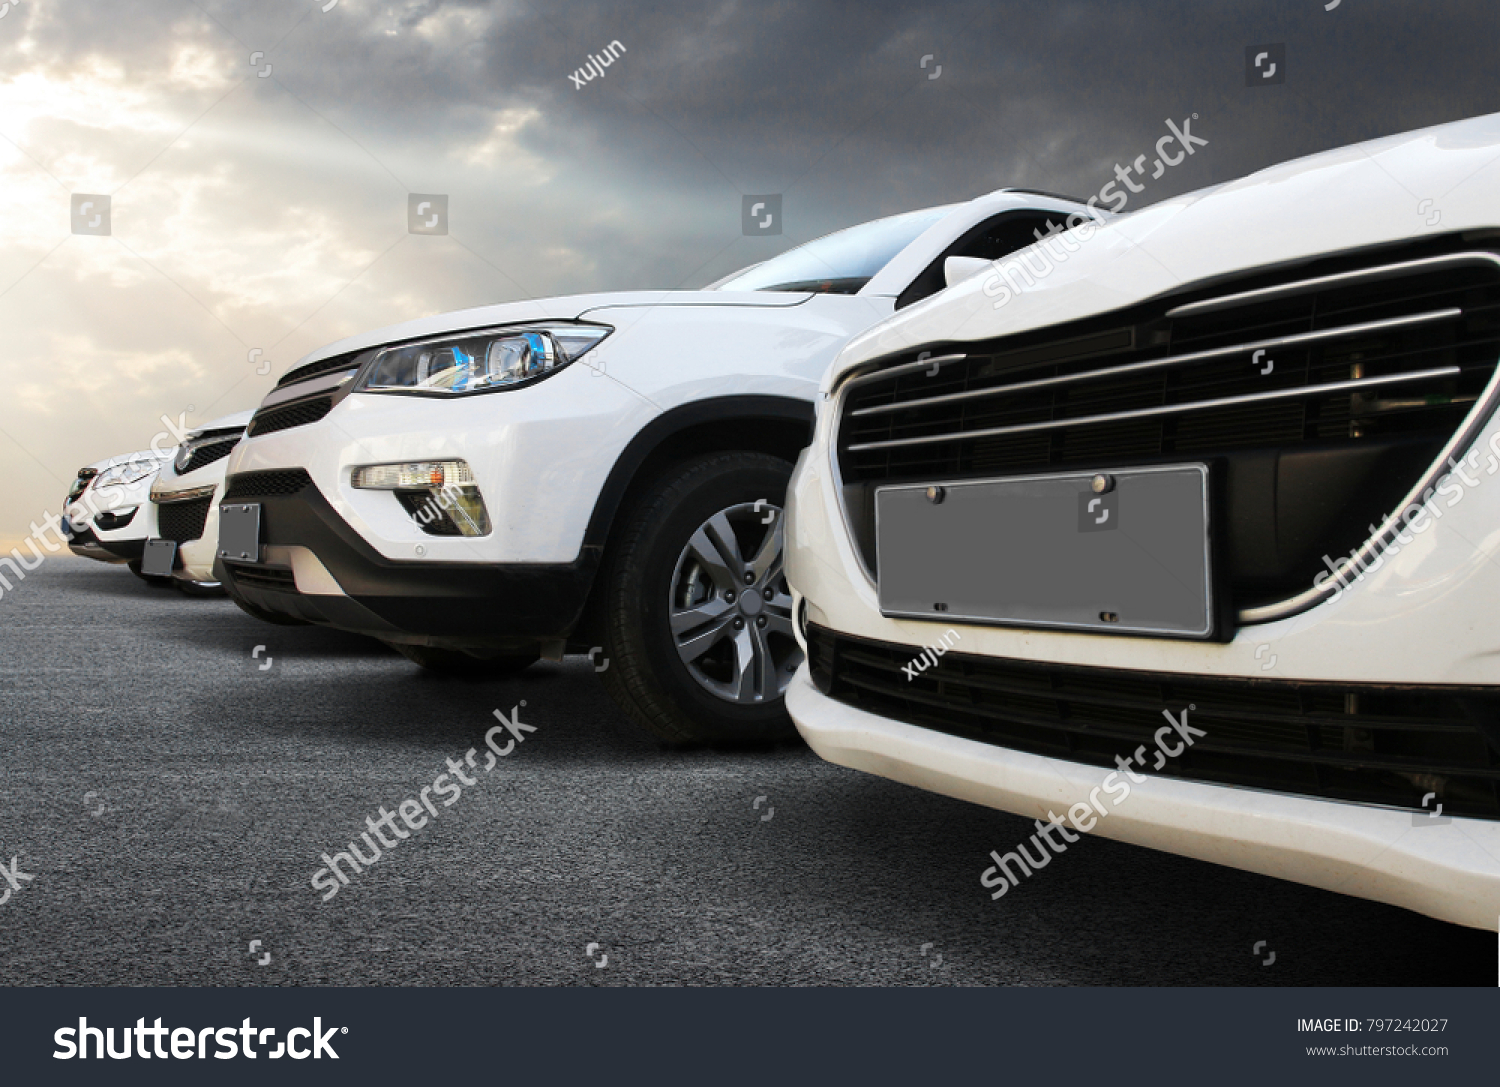 In the automobile industry, the cars are lined up neatly in the square. #797242027